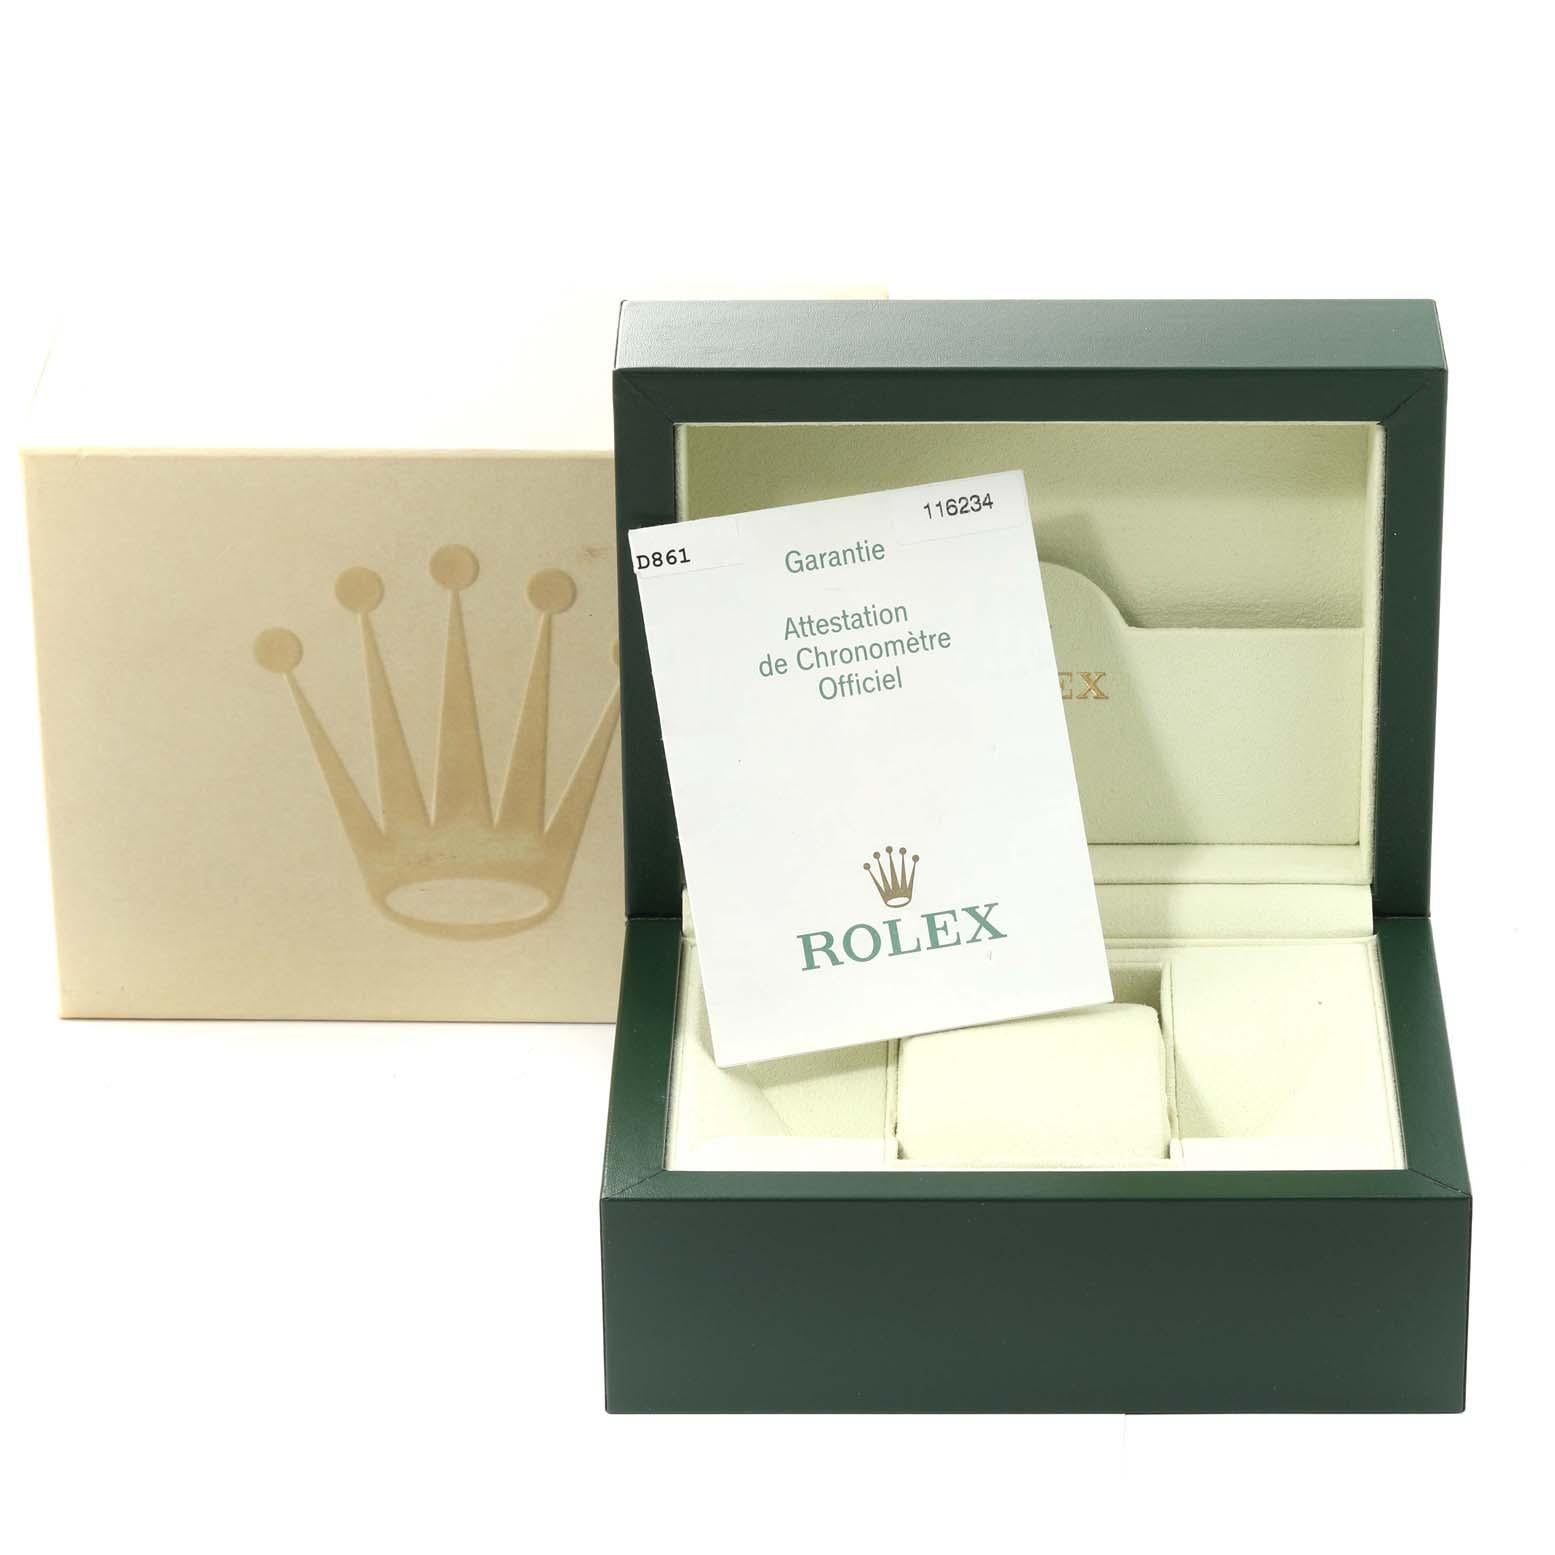 Rolex Datejust Steel White Gold Silver Dial Mens Watch 116234 Box Papers en vente 2